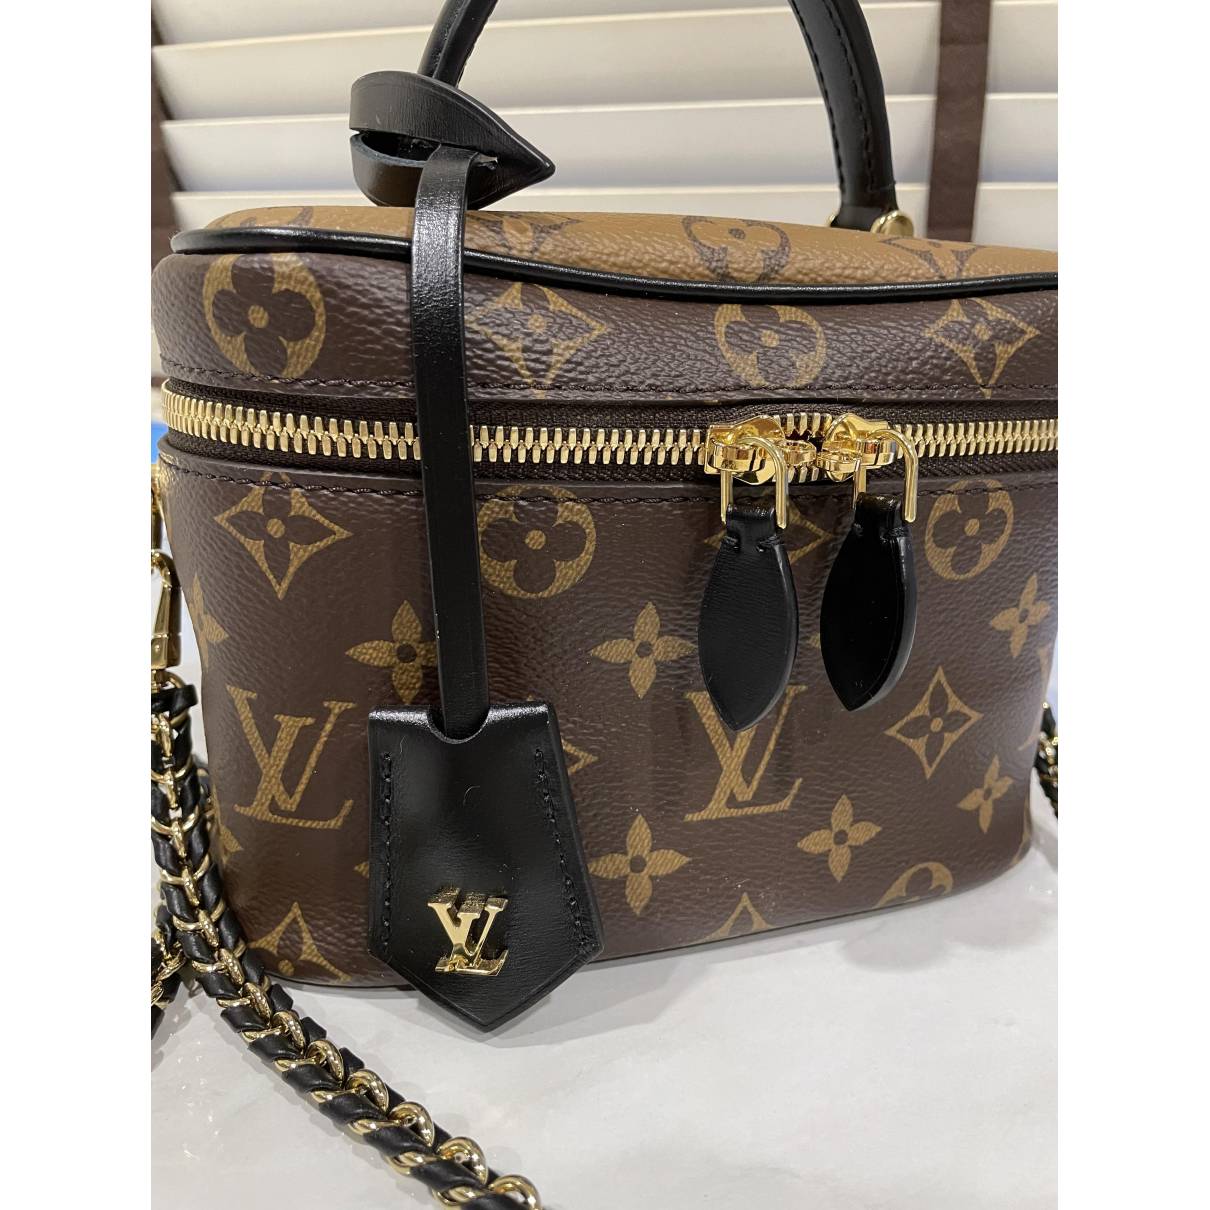 Louis Vuitton - Authenticated Vanity Handbag - Cloth Brown Plain for Women, Very Good Condition